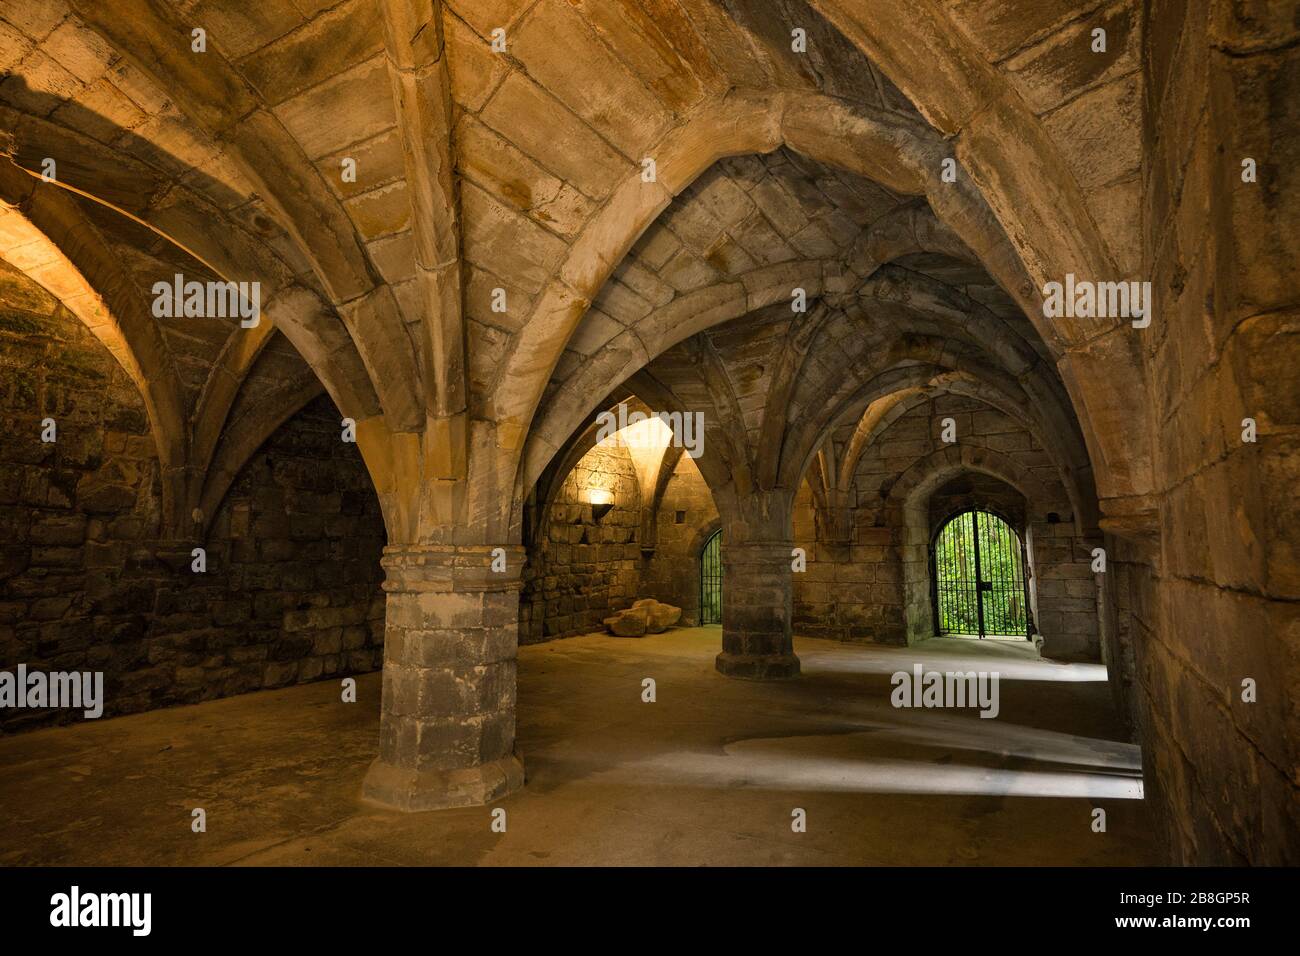 Arches and curved architecture inside the crypt of the Dunfermline Abbey, founded in 1128 as a Benedictine abbey, a Scotland Parish Church in the hist Stock Photo